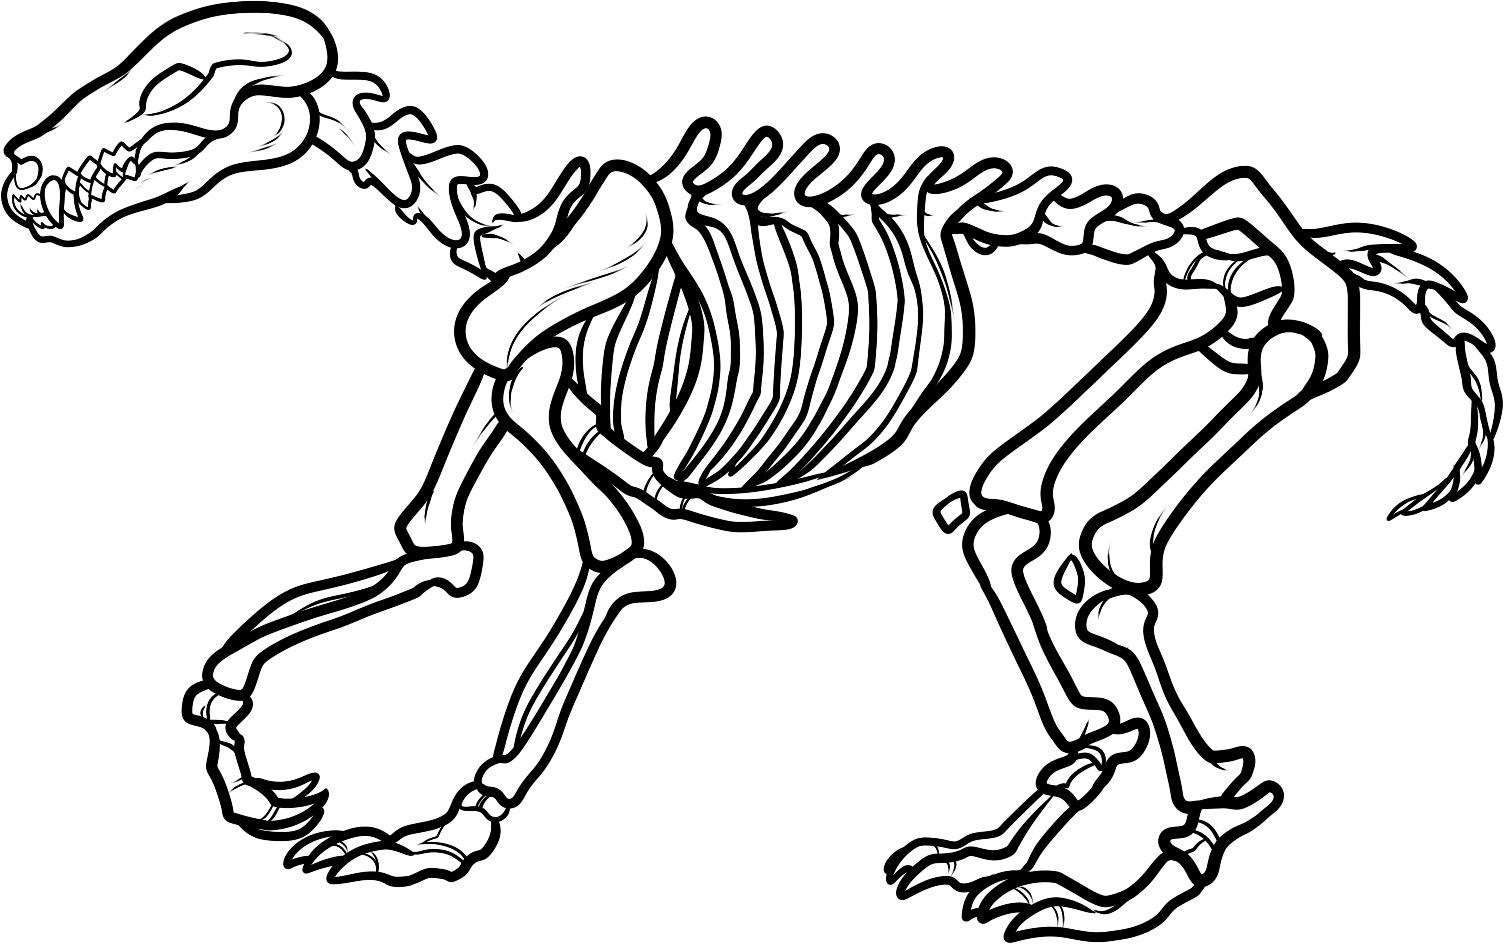 dinosaur skeleton coloring pages pictures imagixs | thingkid.